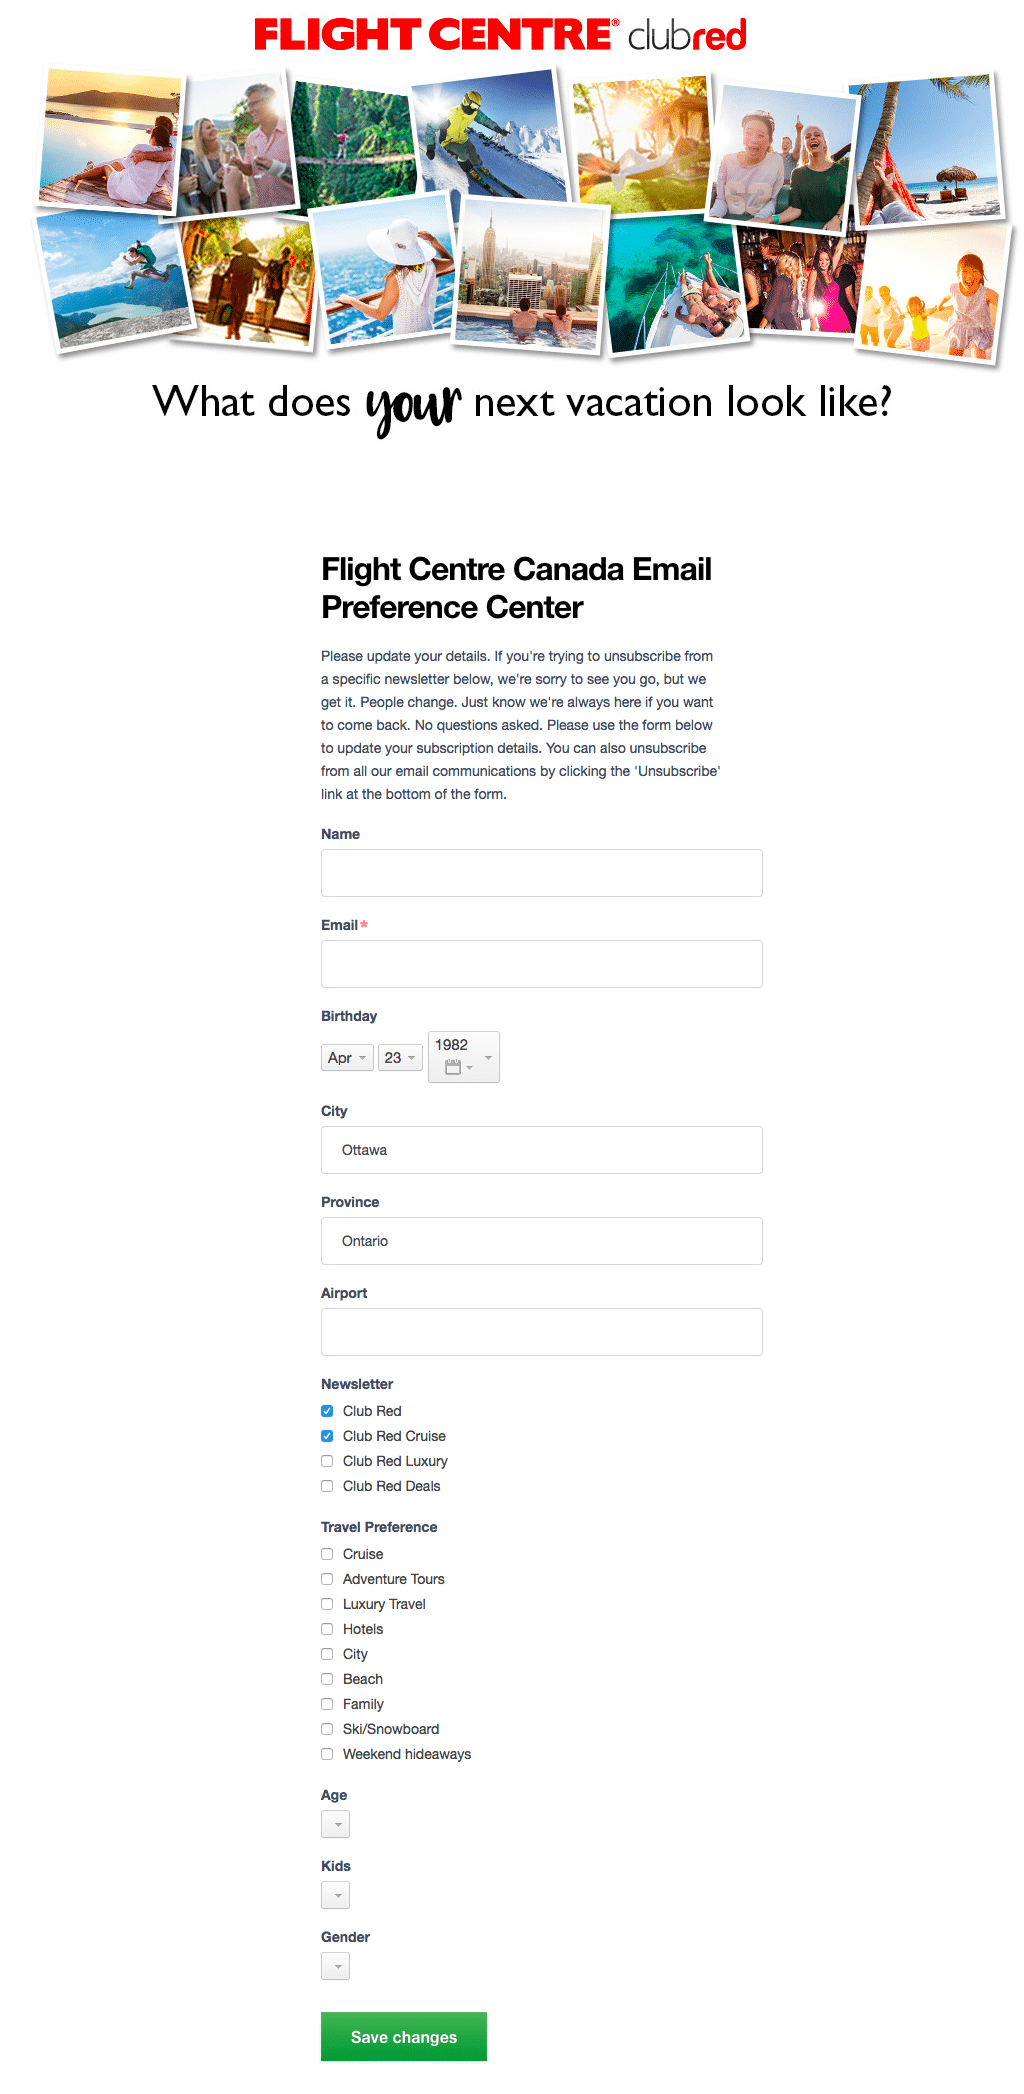 Flight Centre – Email Preference Center